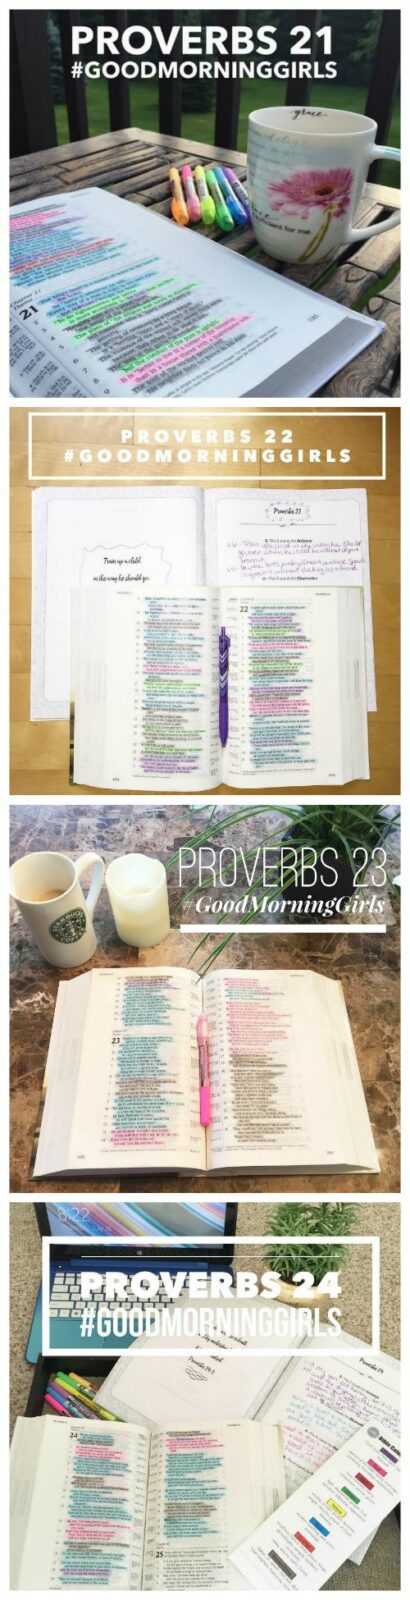 Proverbs 21-24 instagram collage